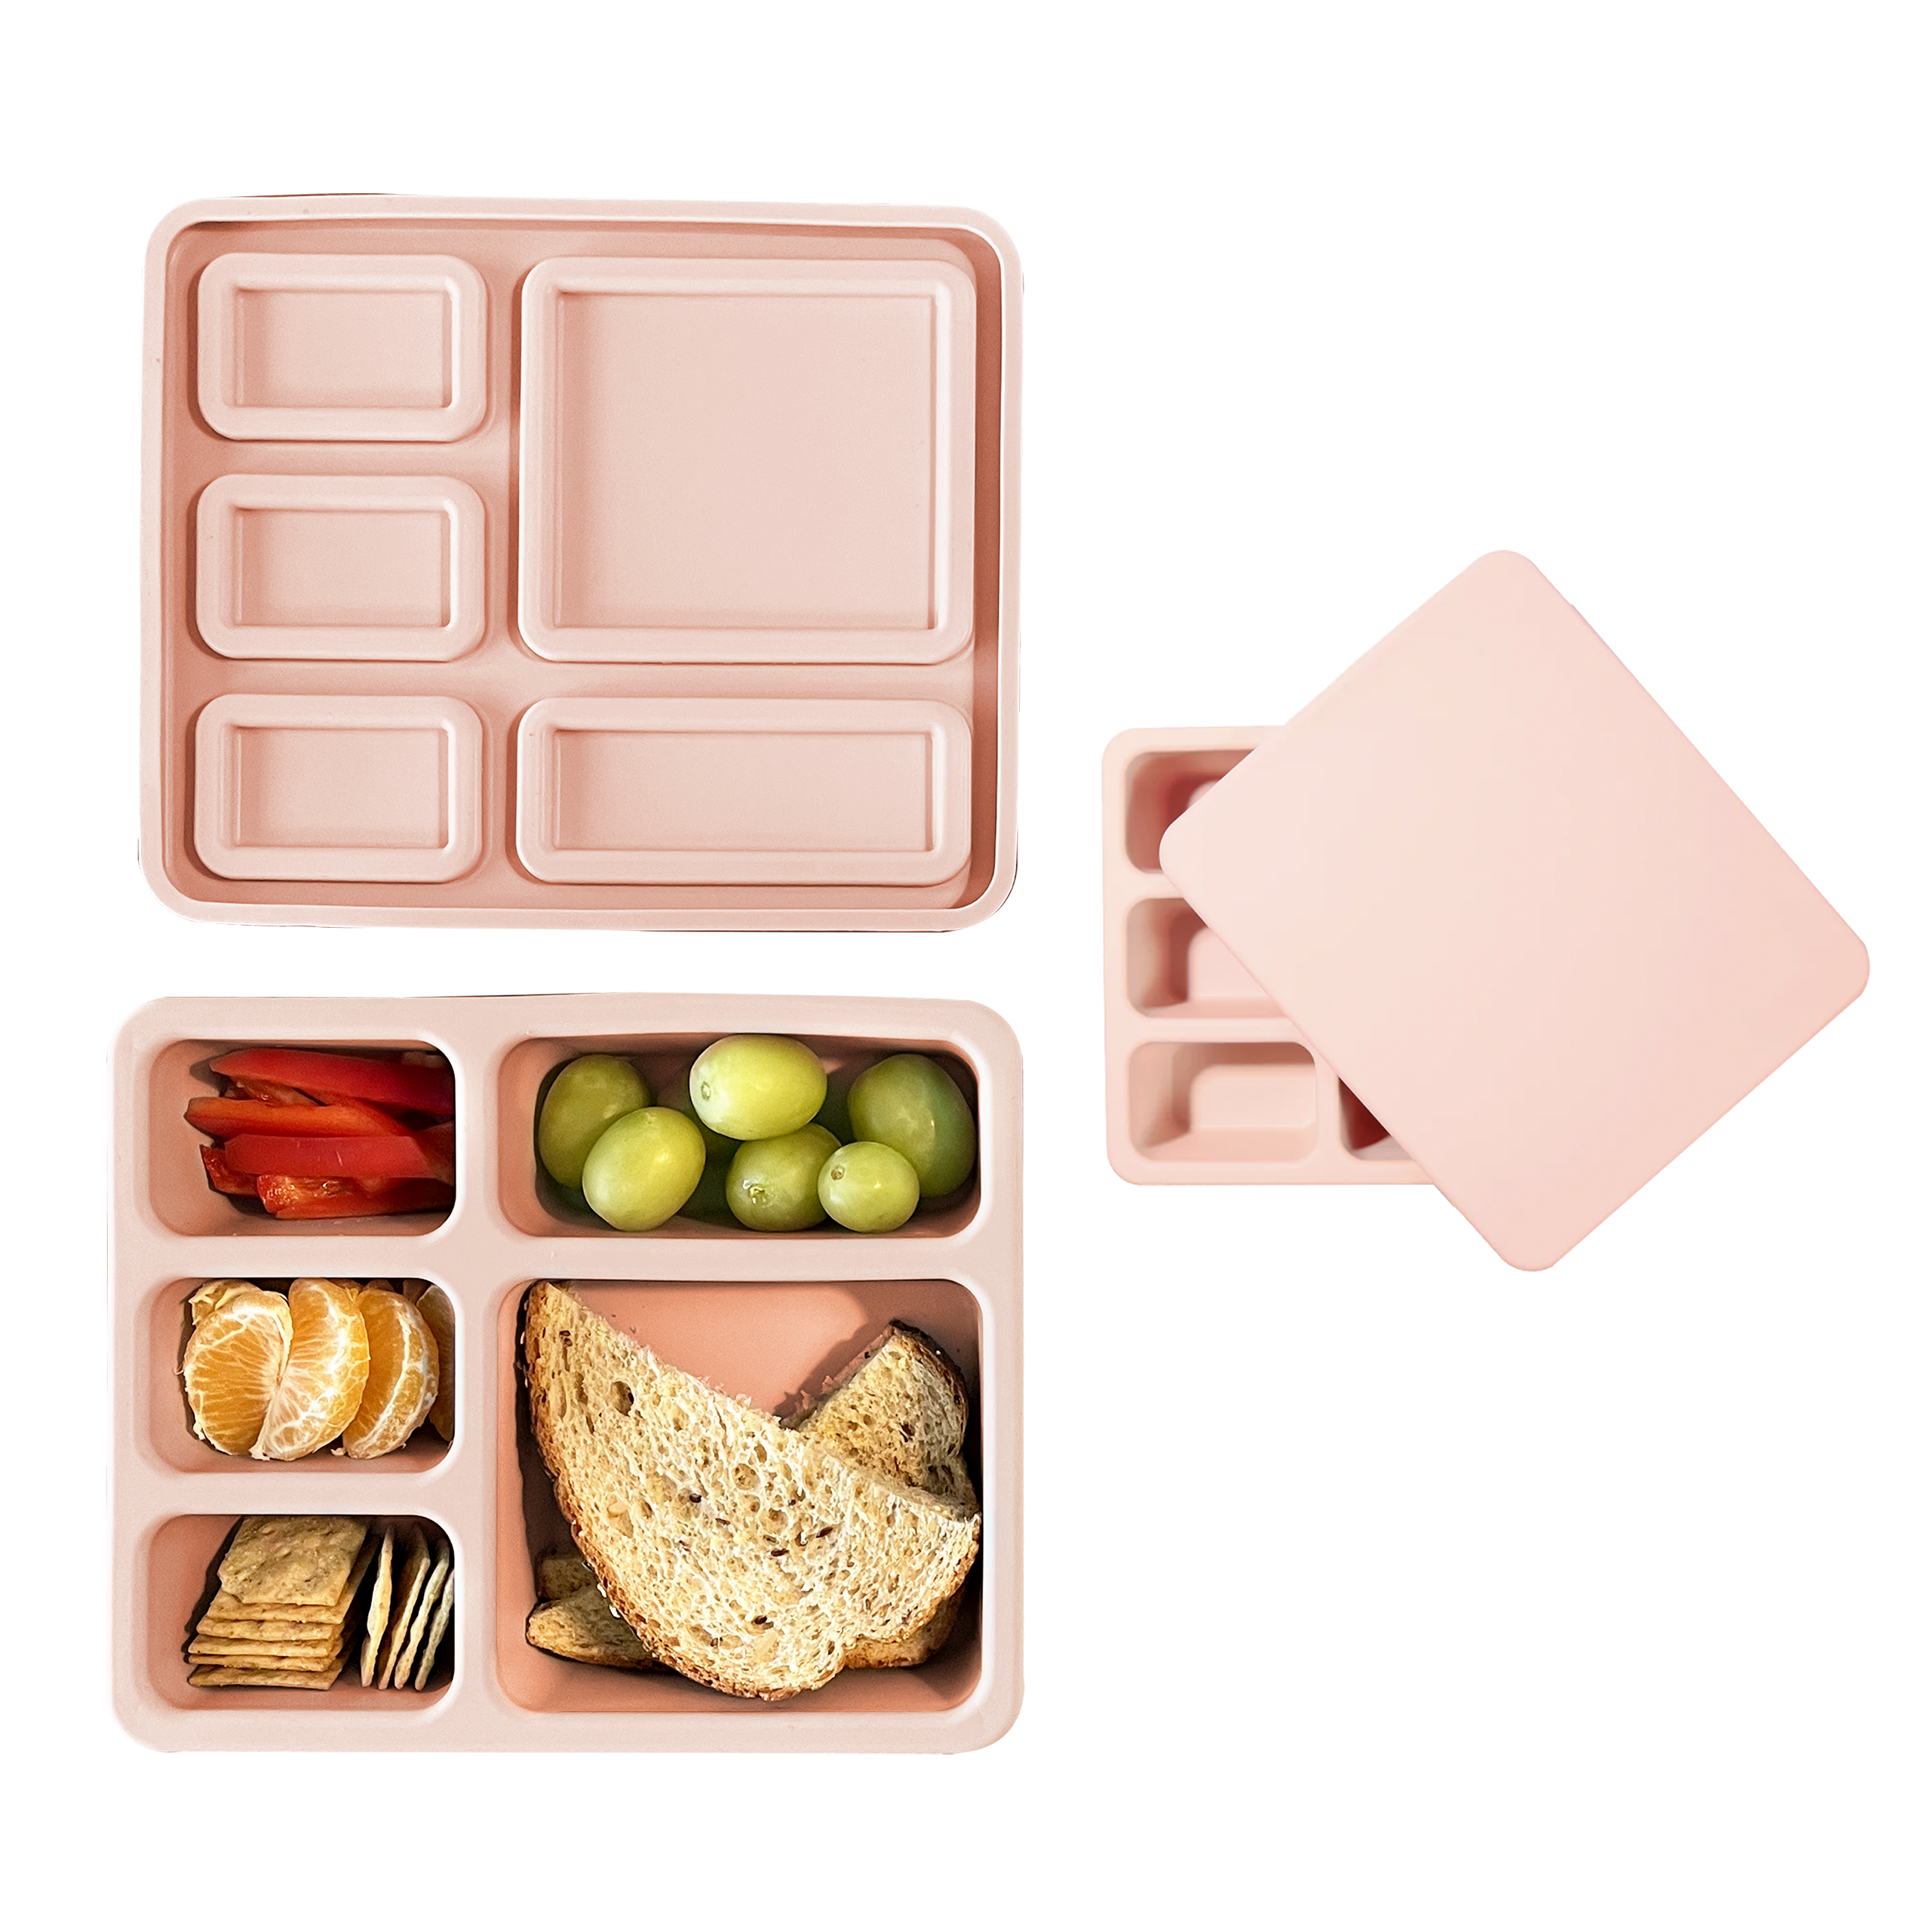 pink bento lunch box